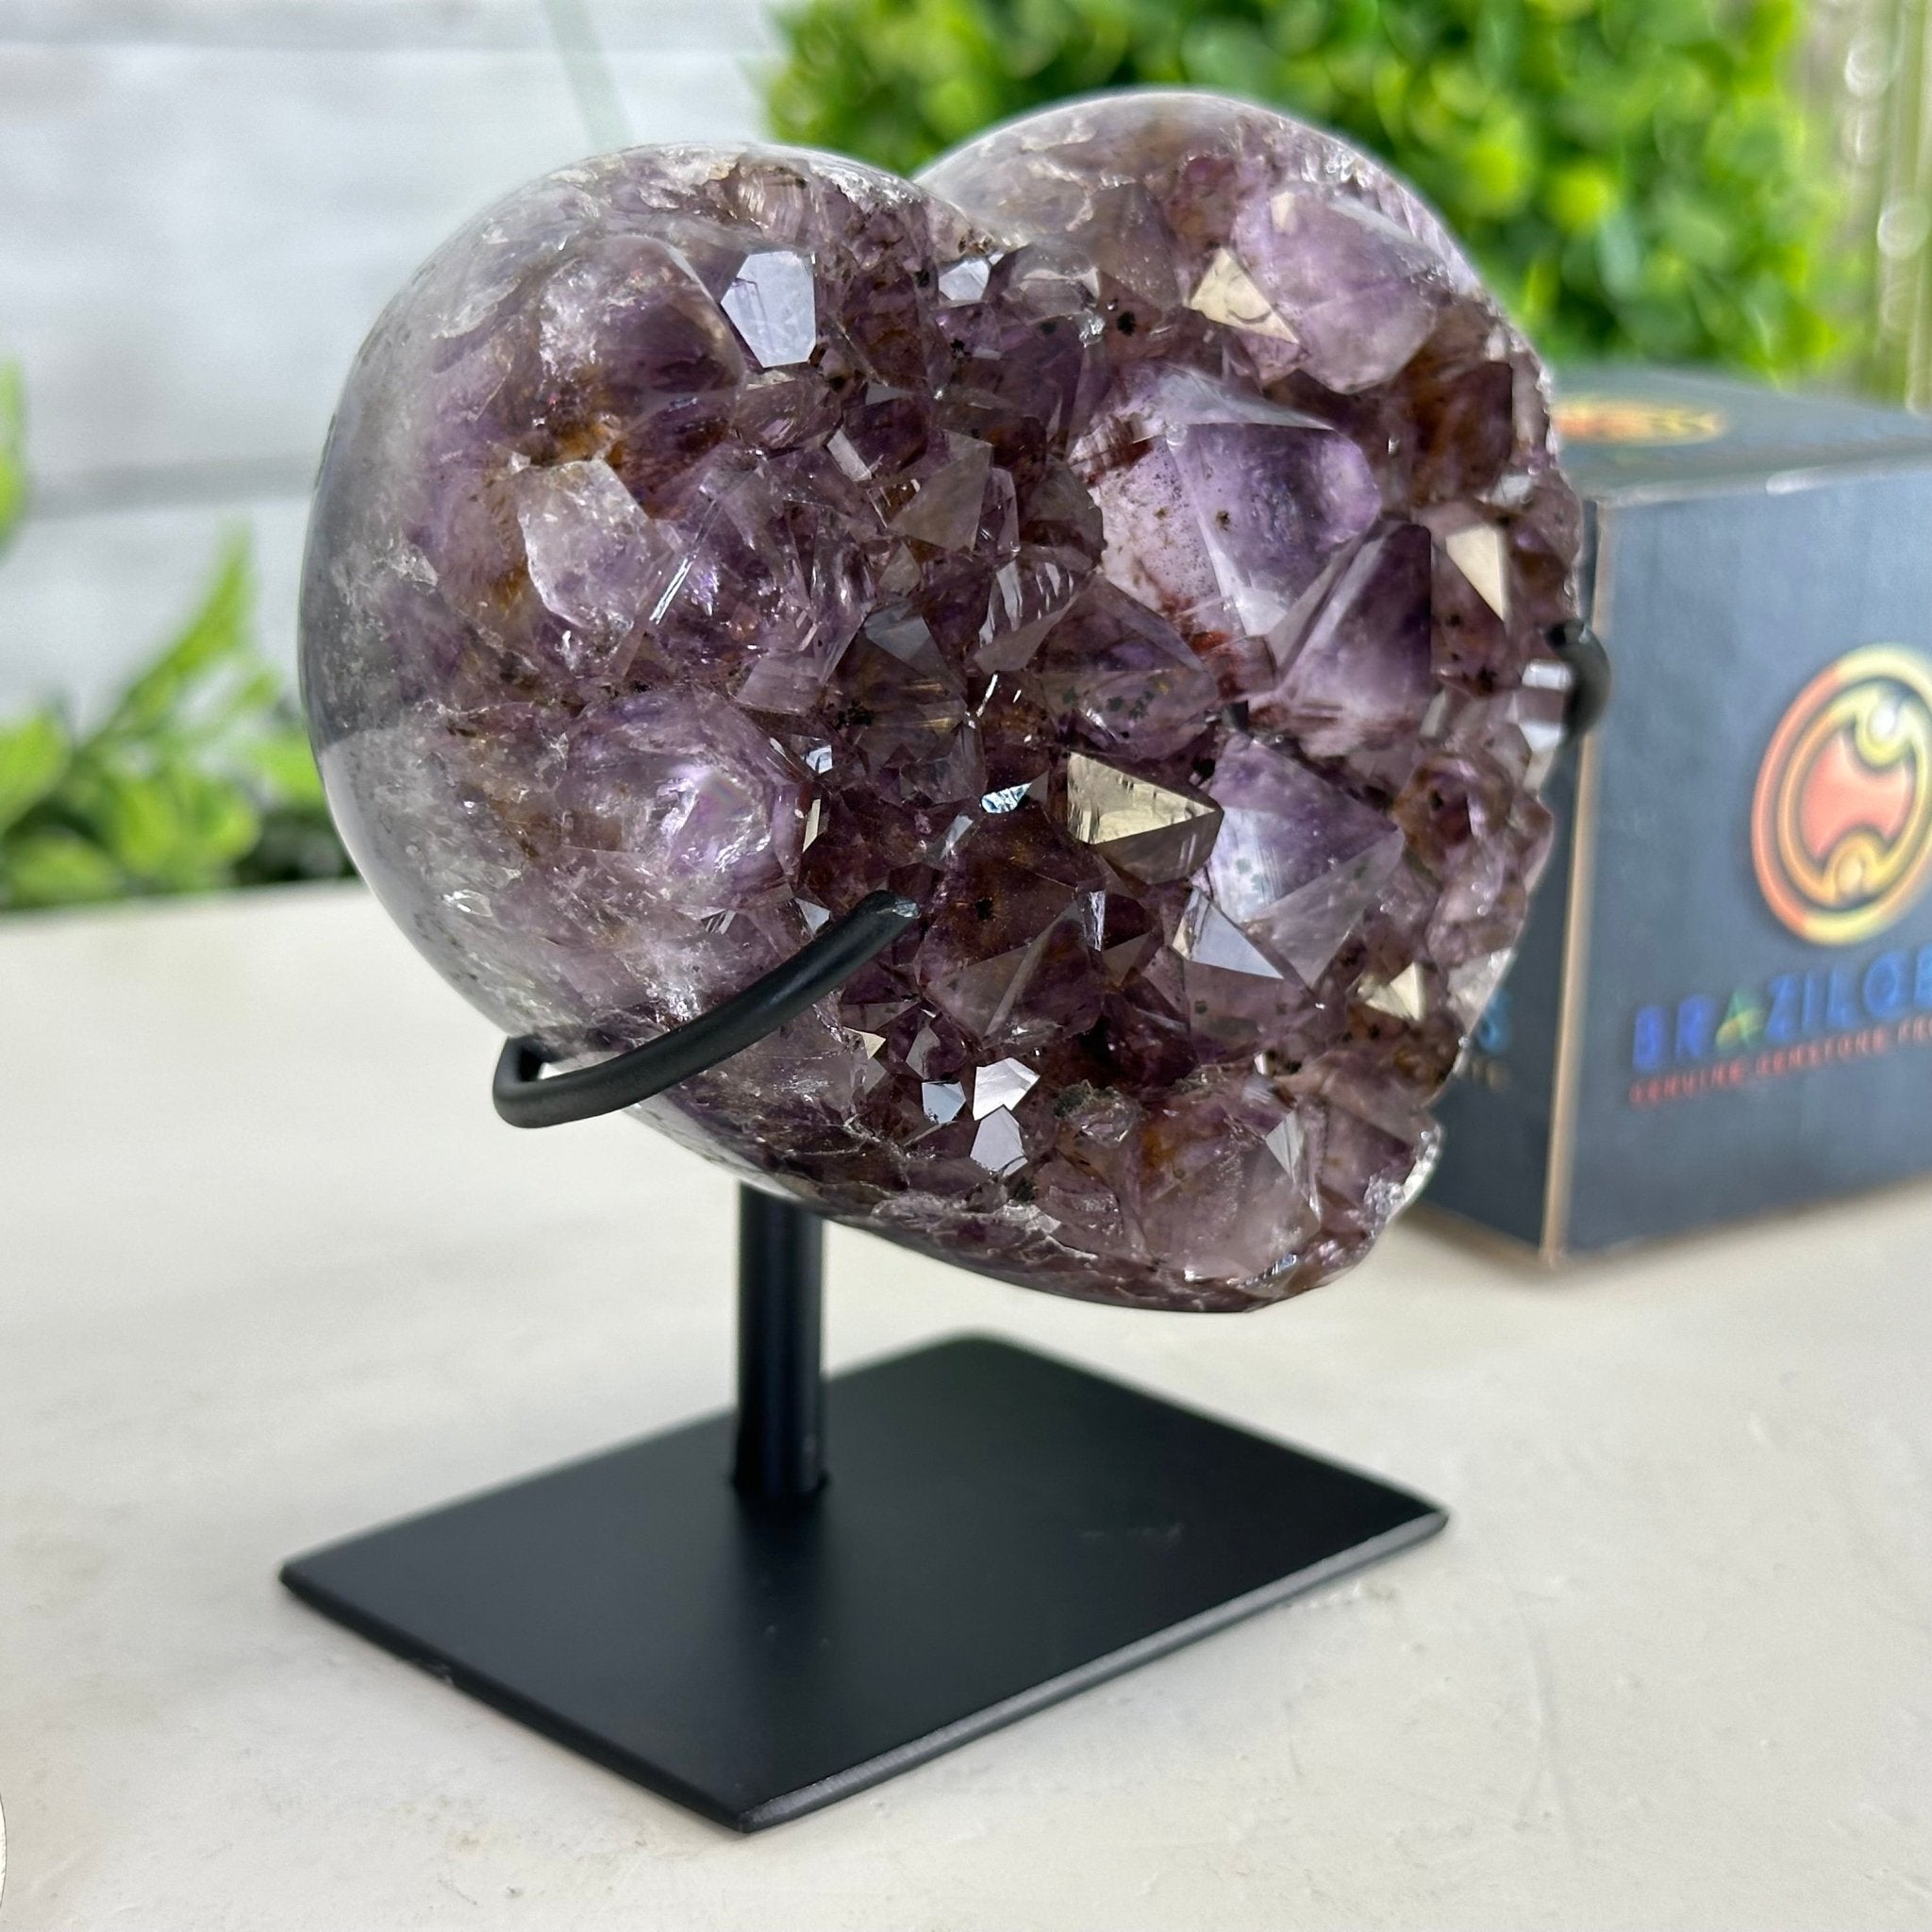 Extra Quality Amethyst Heart Geode w/ metal stand, 1.1 lbs & 3.9" Tall #5463-0295 - Brazil GemsBrazil GemsExtra Quality Amethyst Heart Geode w/ metal stand, 1.1 lbs & 3.9" Tall #5463-0295Hearts5463-0295